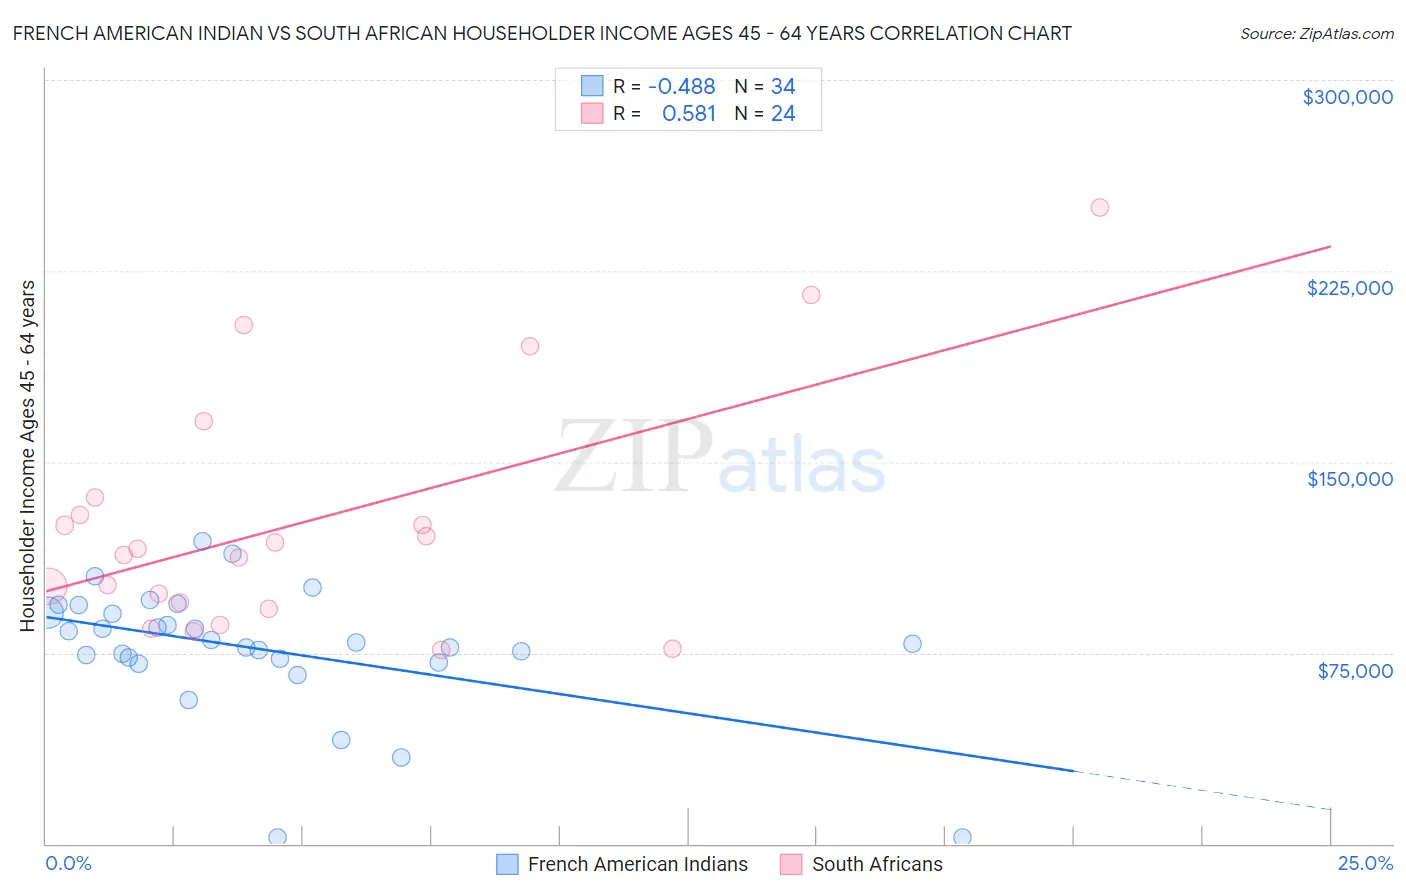 French American Indian vs South African Householder Income Ages 45 - 64 years